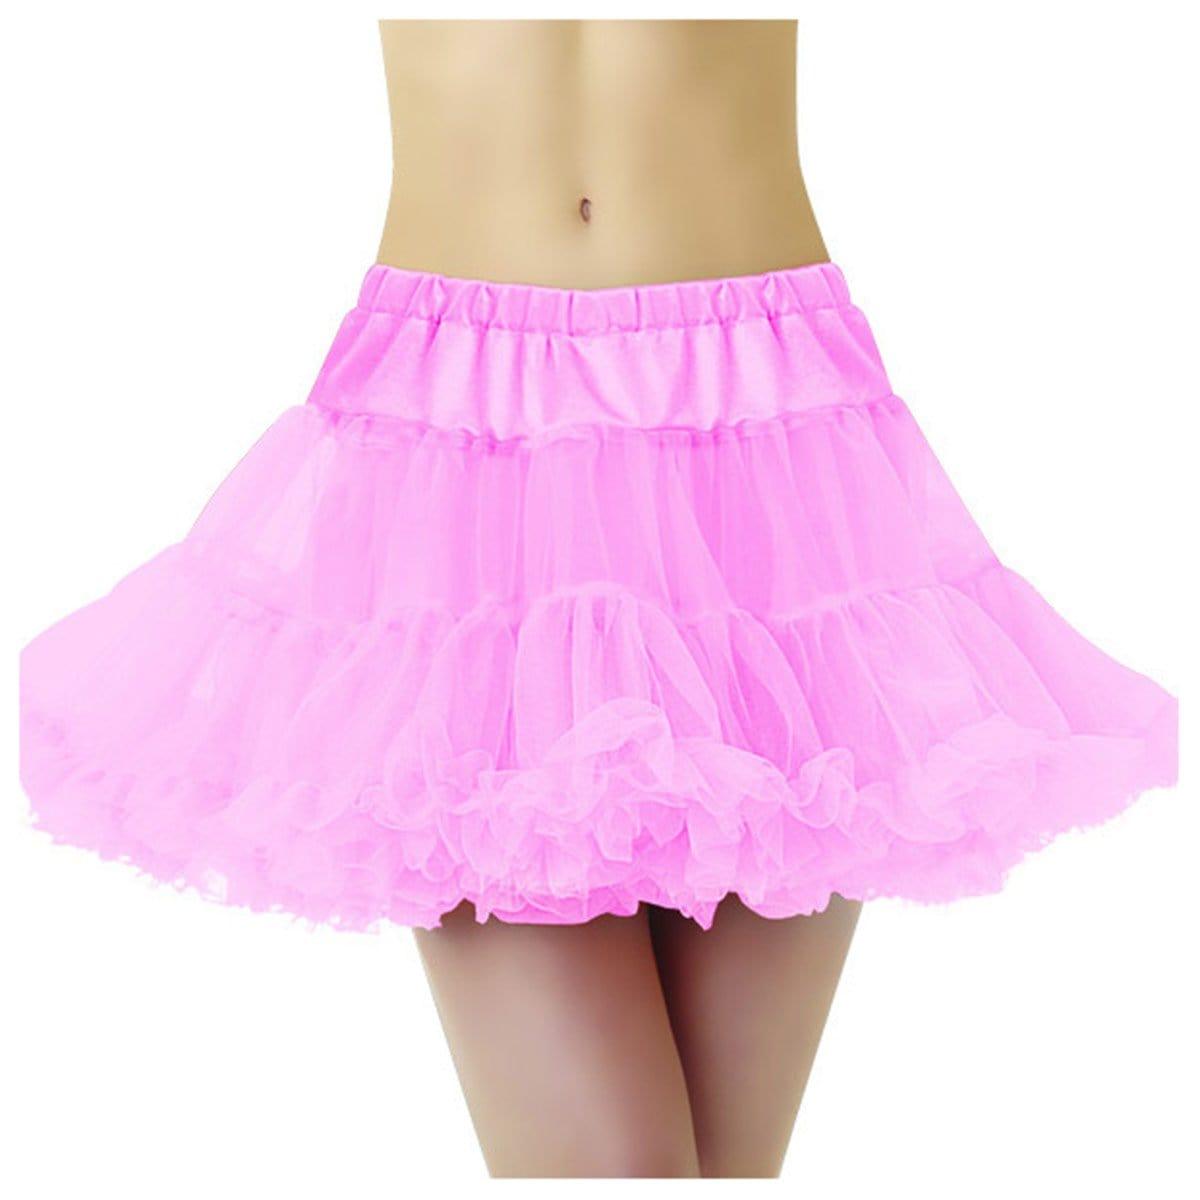 Buy Costume Accessories Pink petticoat for women sold at Party Expert